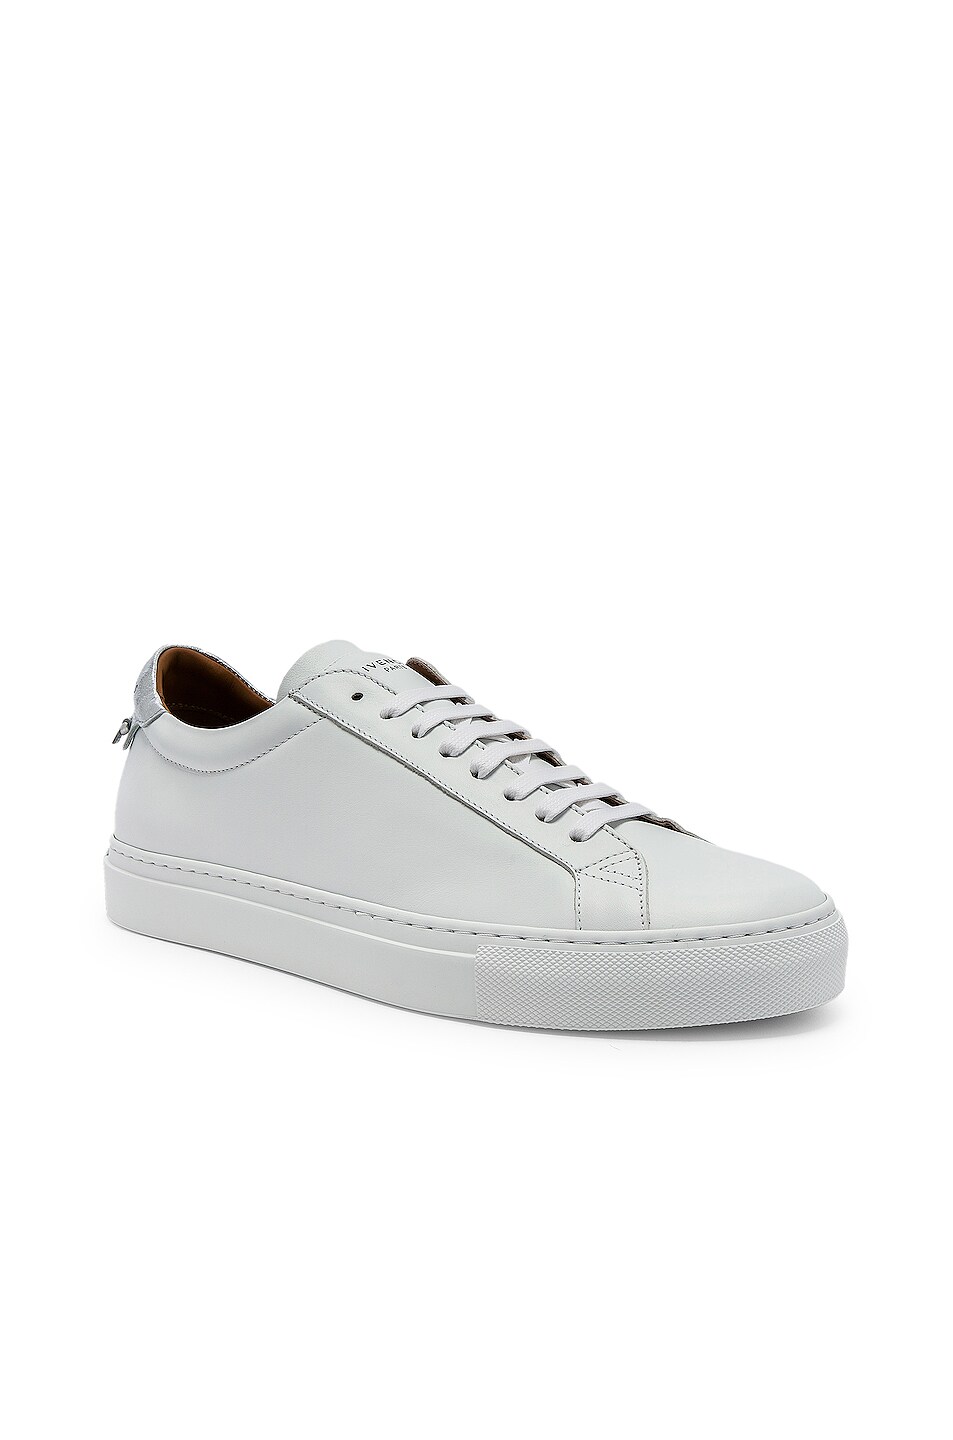 Image 1 of Givenchy Urban Street Low Sneakers in White & Silver